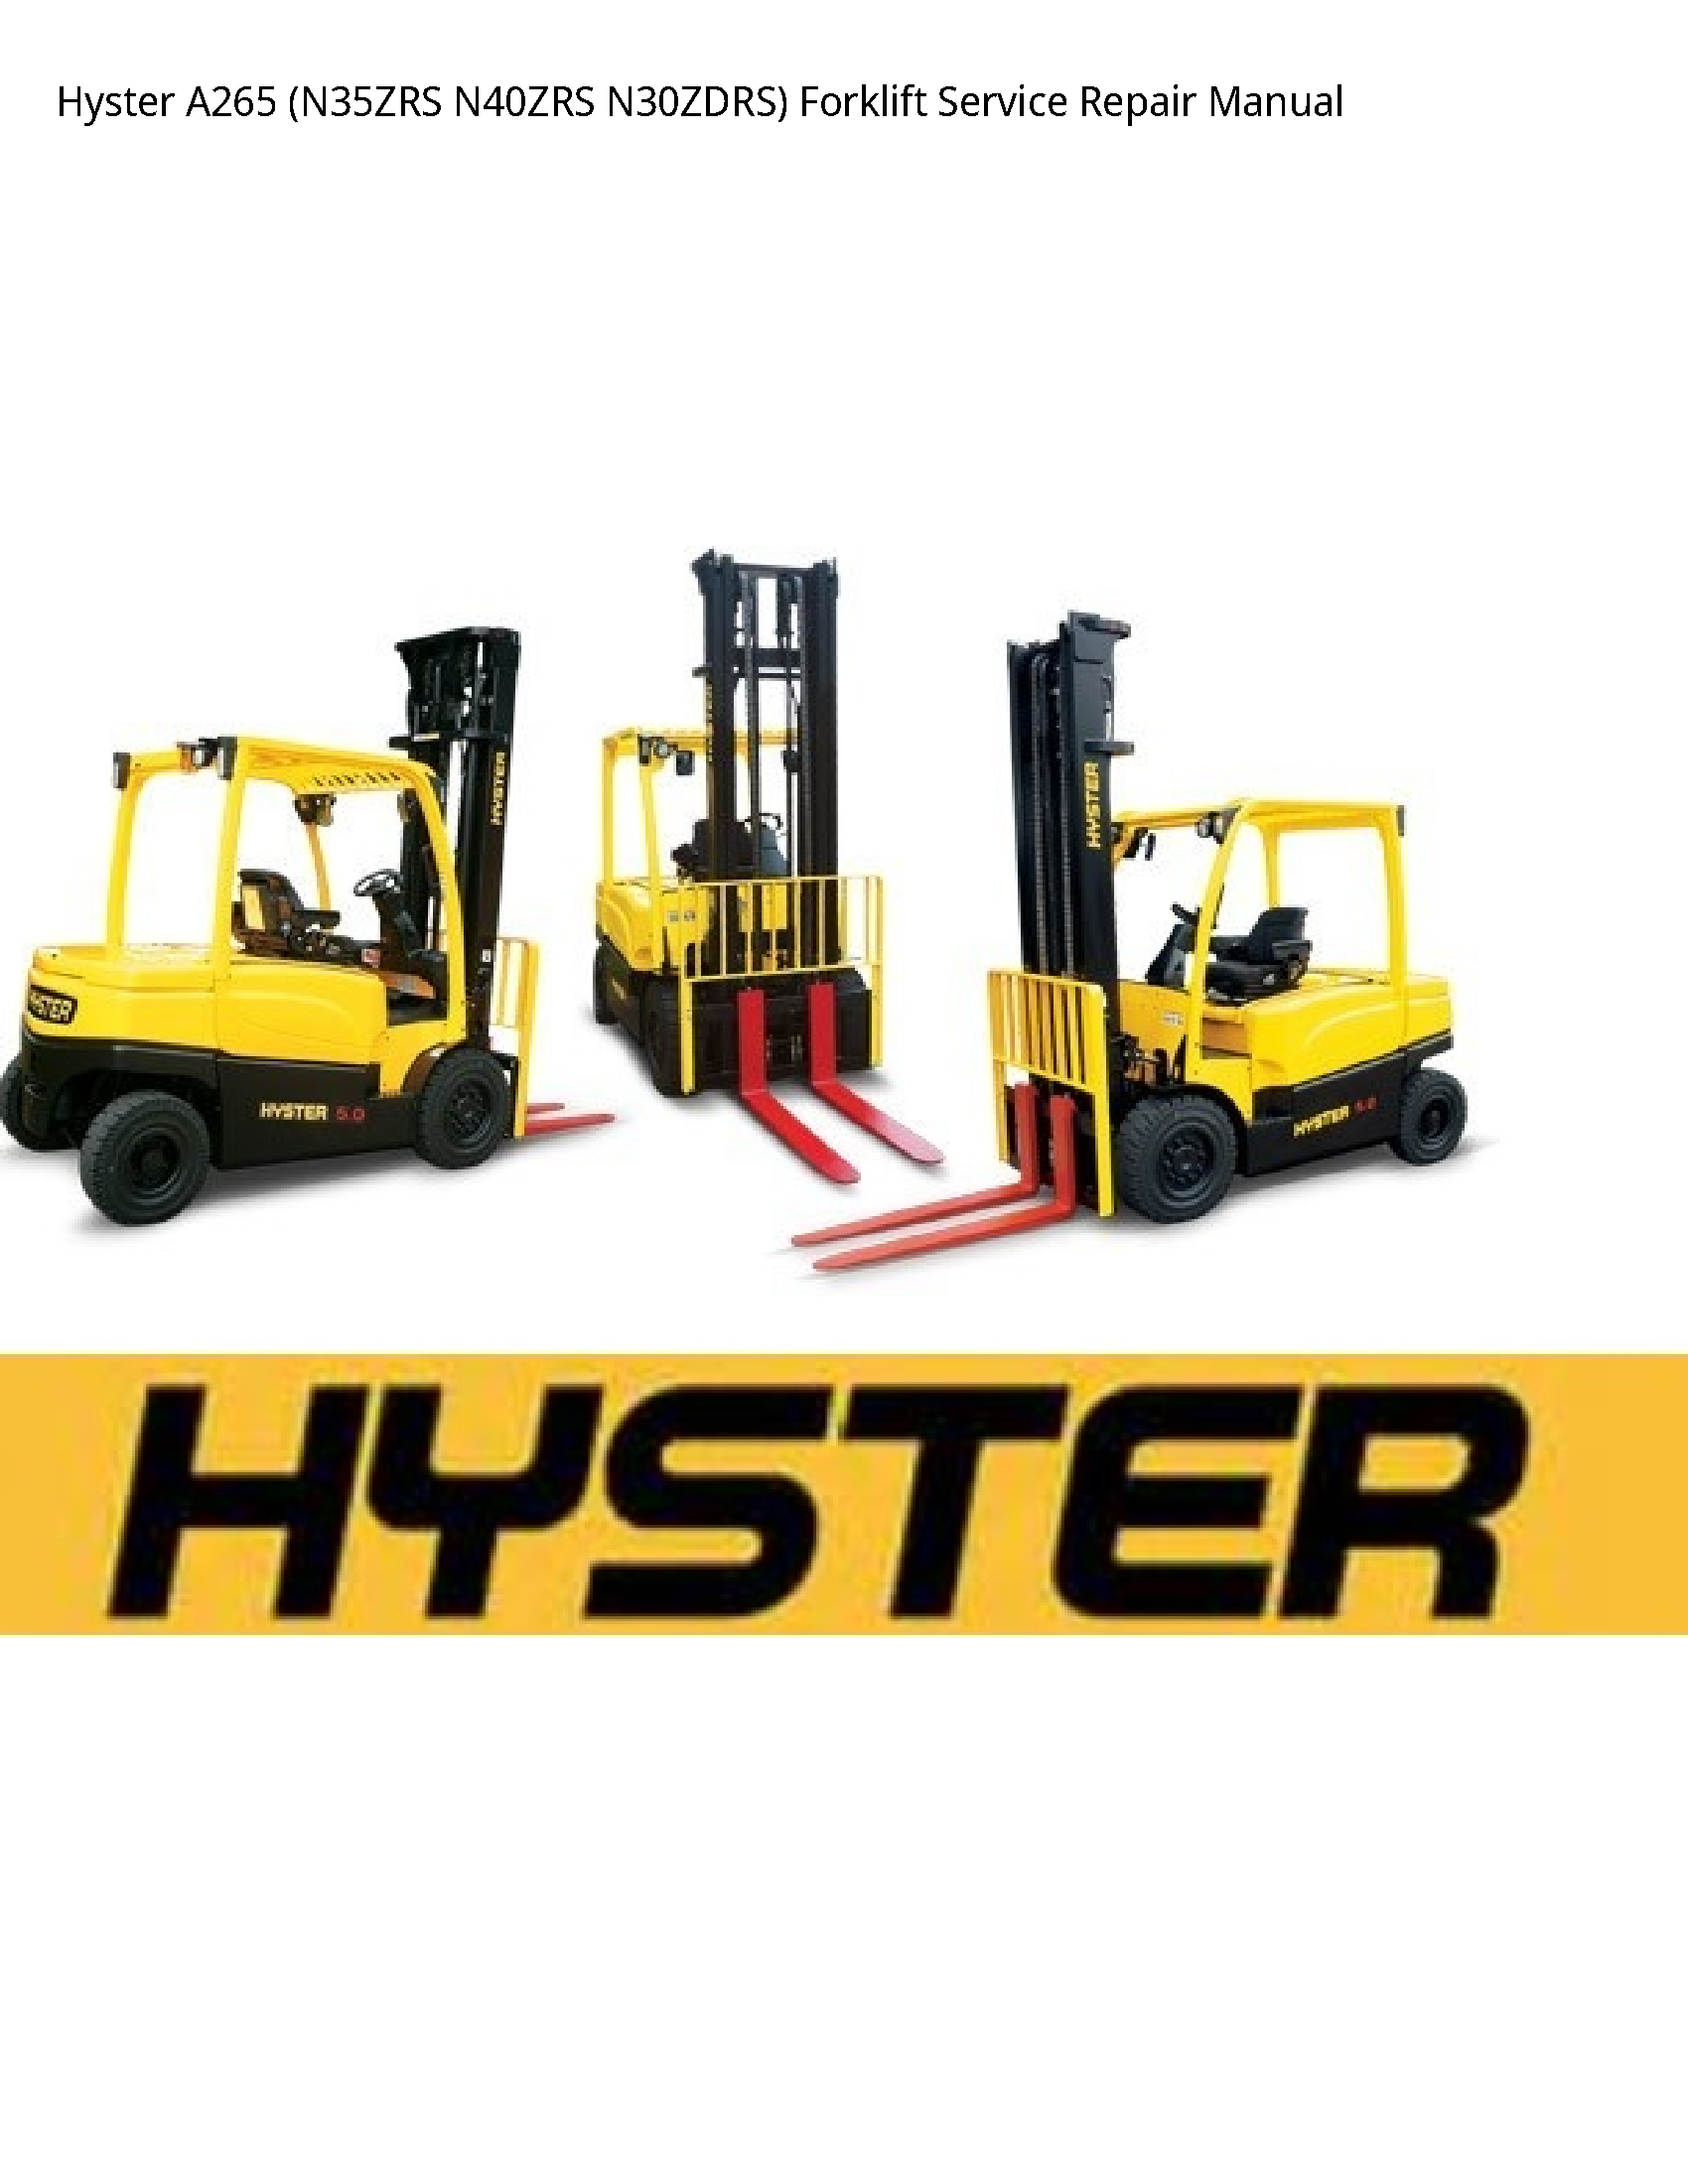 Hyster A265 Forklift manual